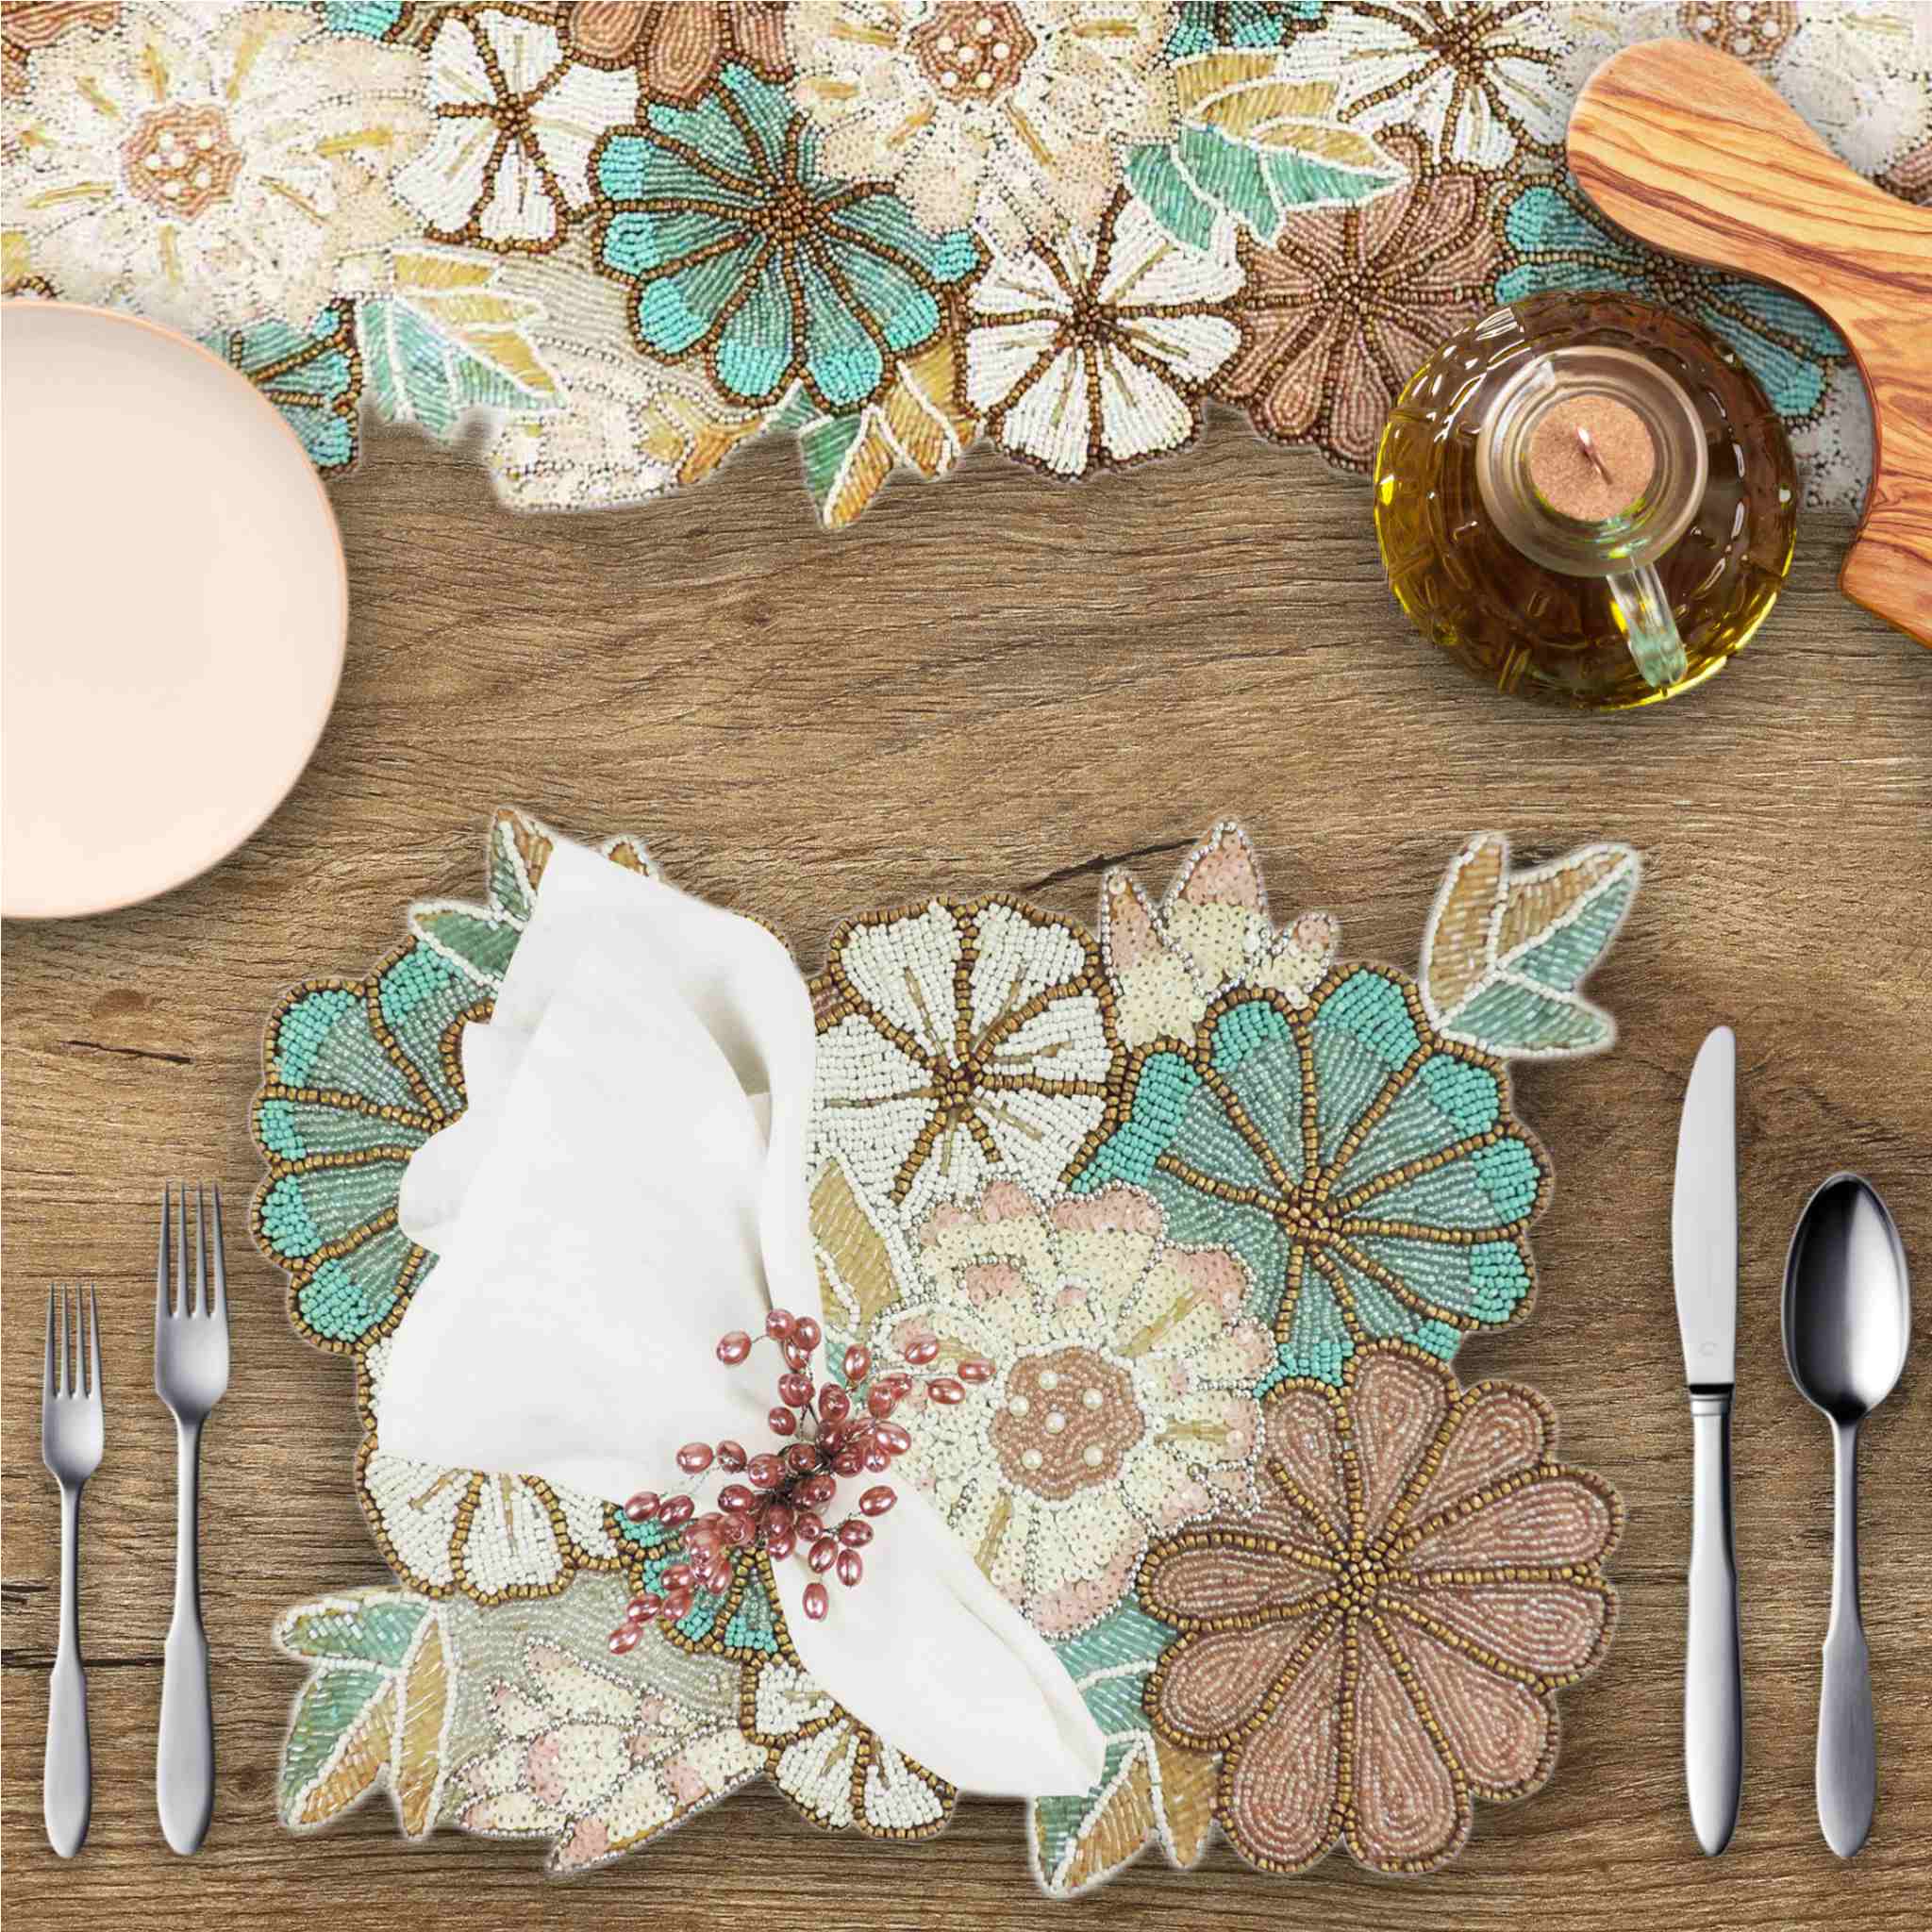 Autumn Blooms Bead Table Setting for 4 - Embroidered Placemats, Napkin Rings & Table Runner in Teal & Grey